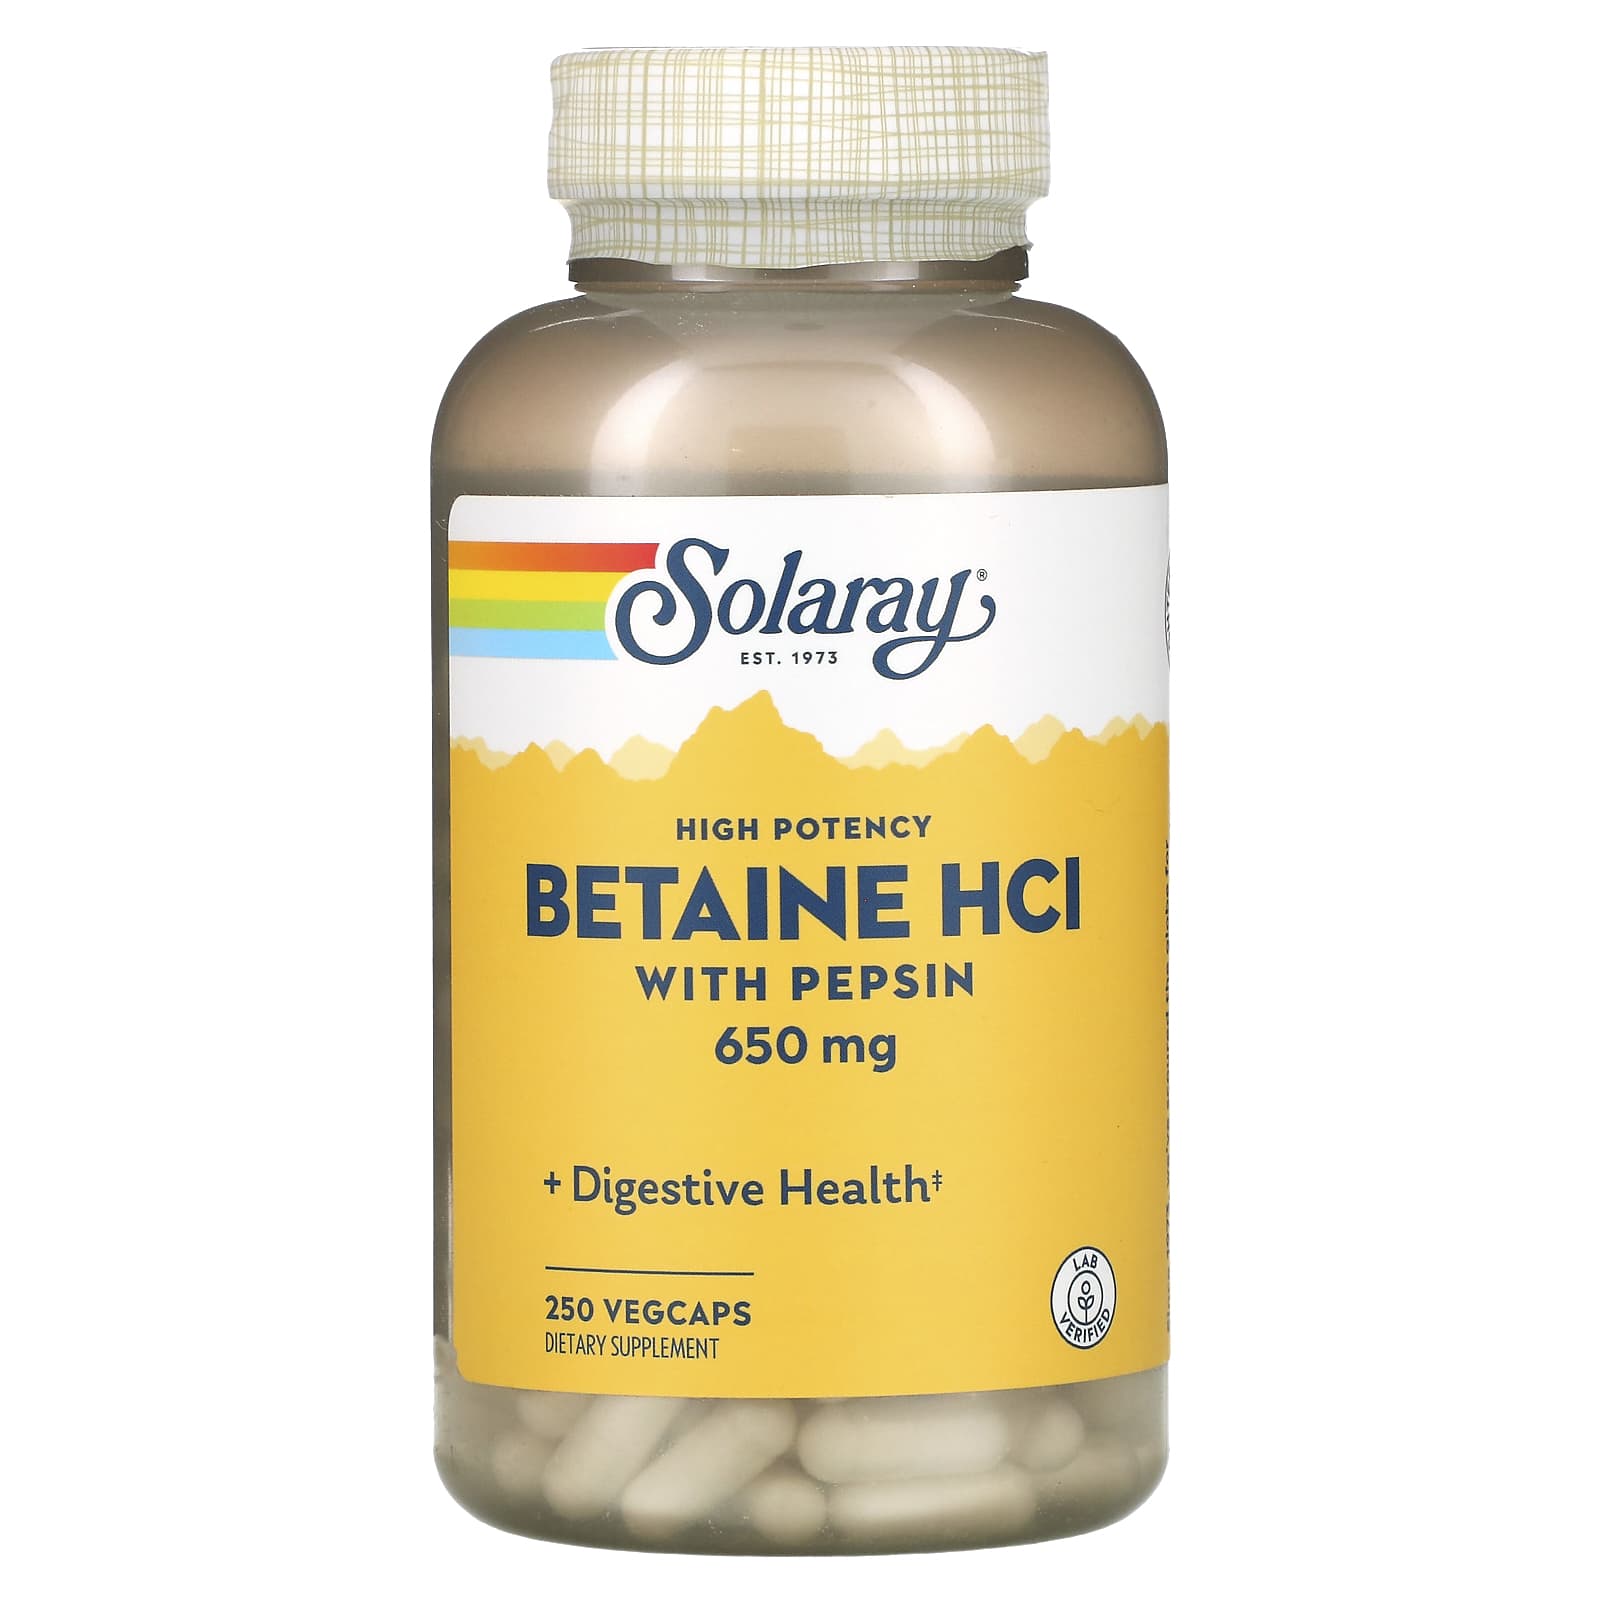 Solaray High Potency Betaine HCL With Pepsin 650 Mg